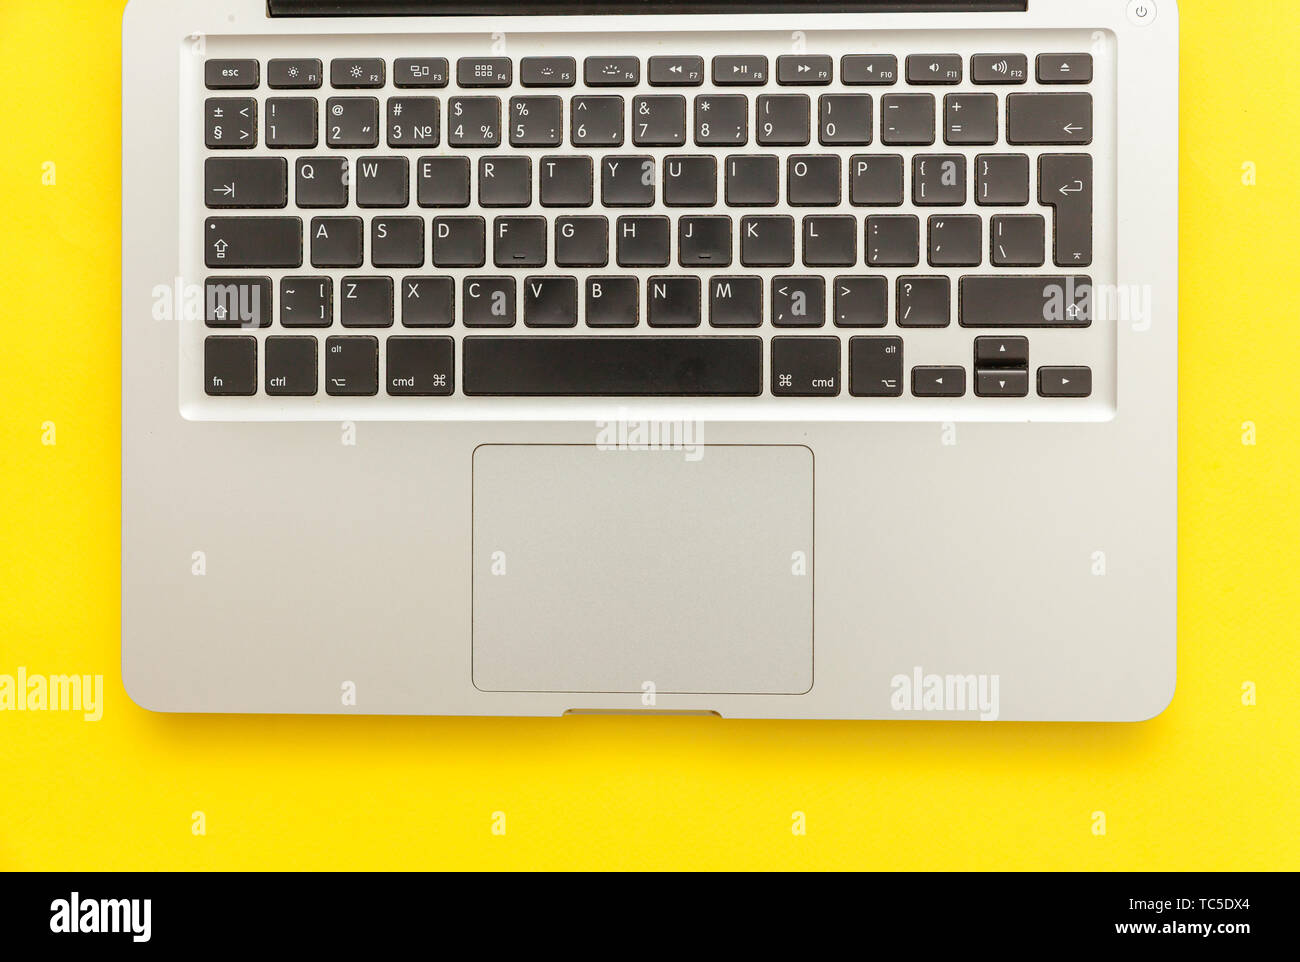 Keyboard laptop computer isolated on yellow desk background. Modern Information technology and sofware advances. Freelance home office programmer or d Stock Photo